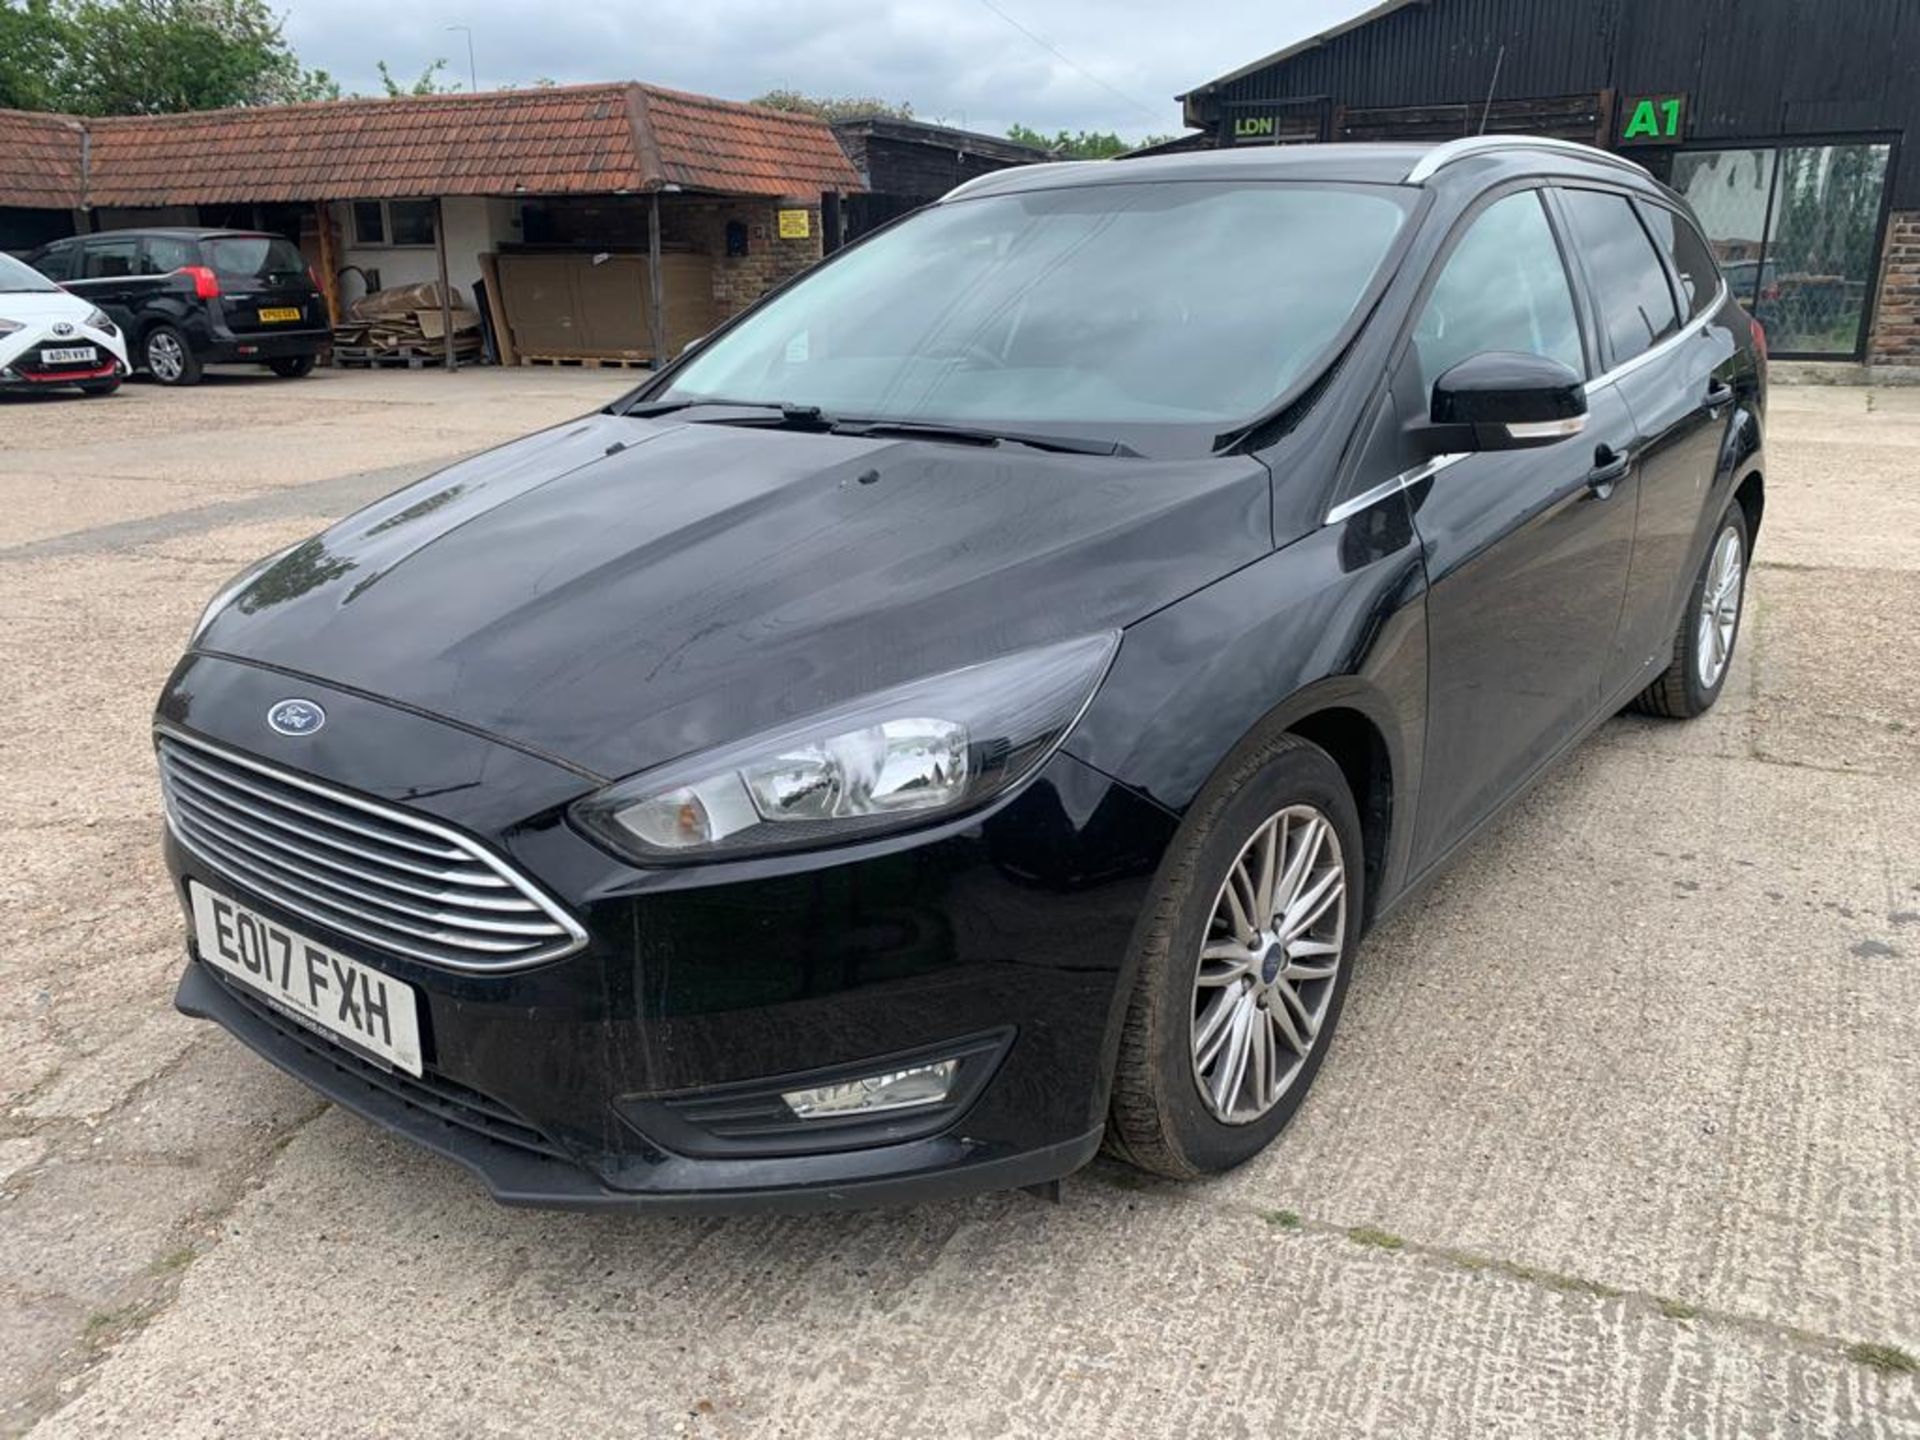 Ford Focus diesel estate car, registration number EO17FXH, first registered 6th March 2017 with appr - Image 8 of 15